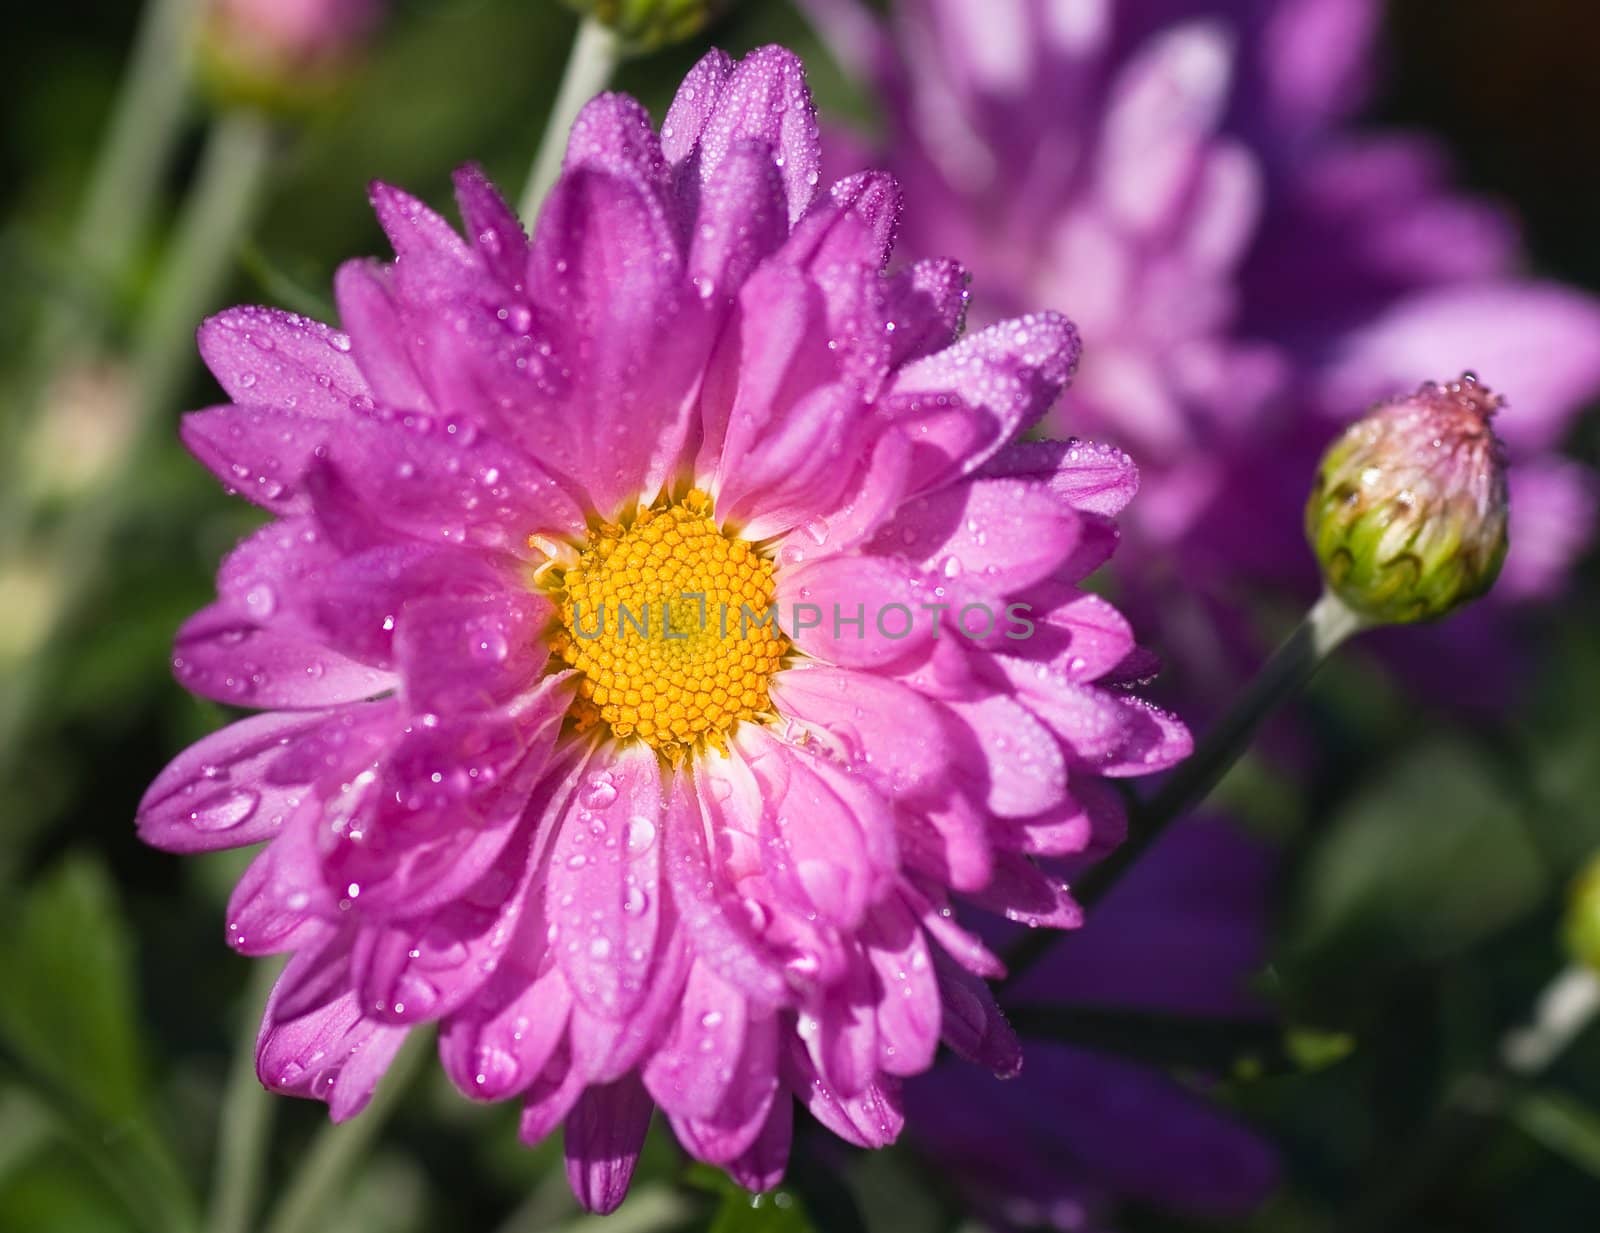 Pink chrysanthemum covered with dew in the morning light by nikolpetr